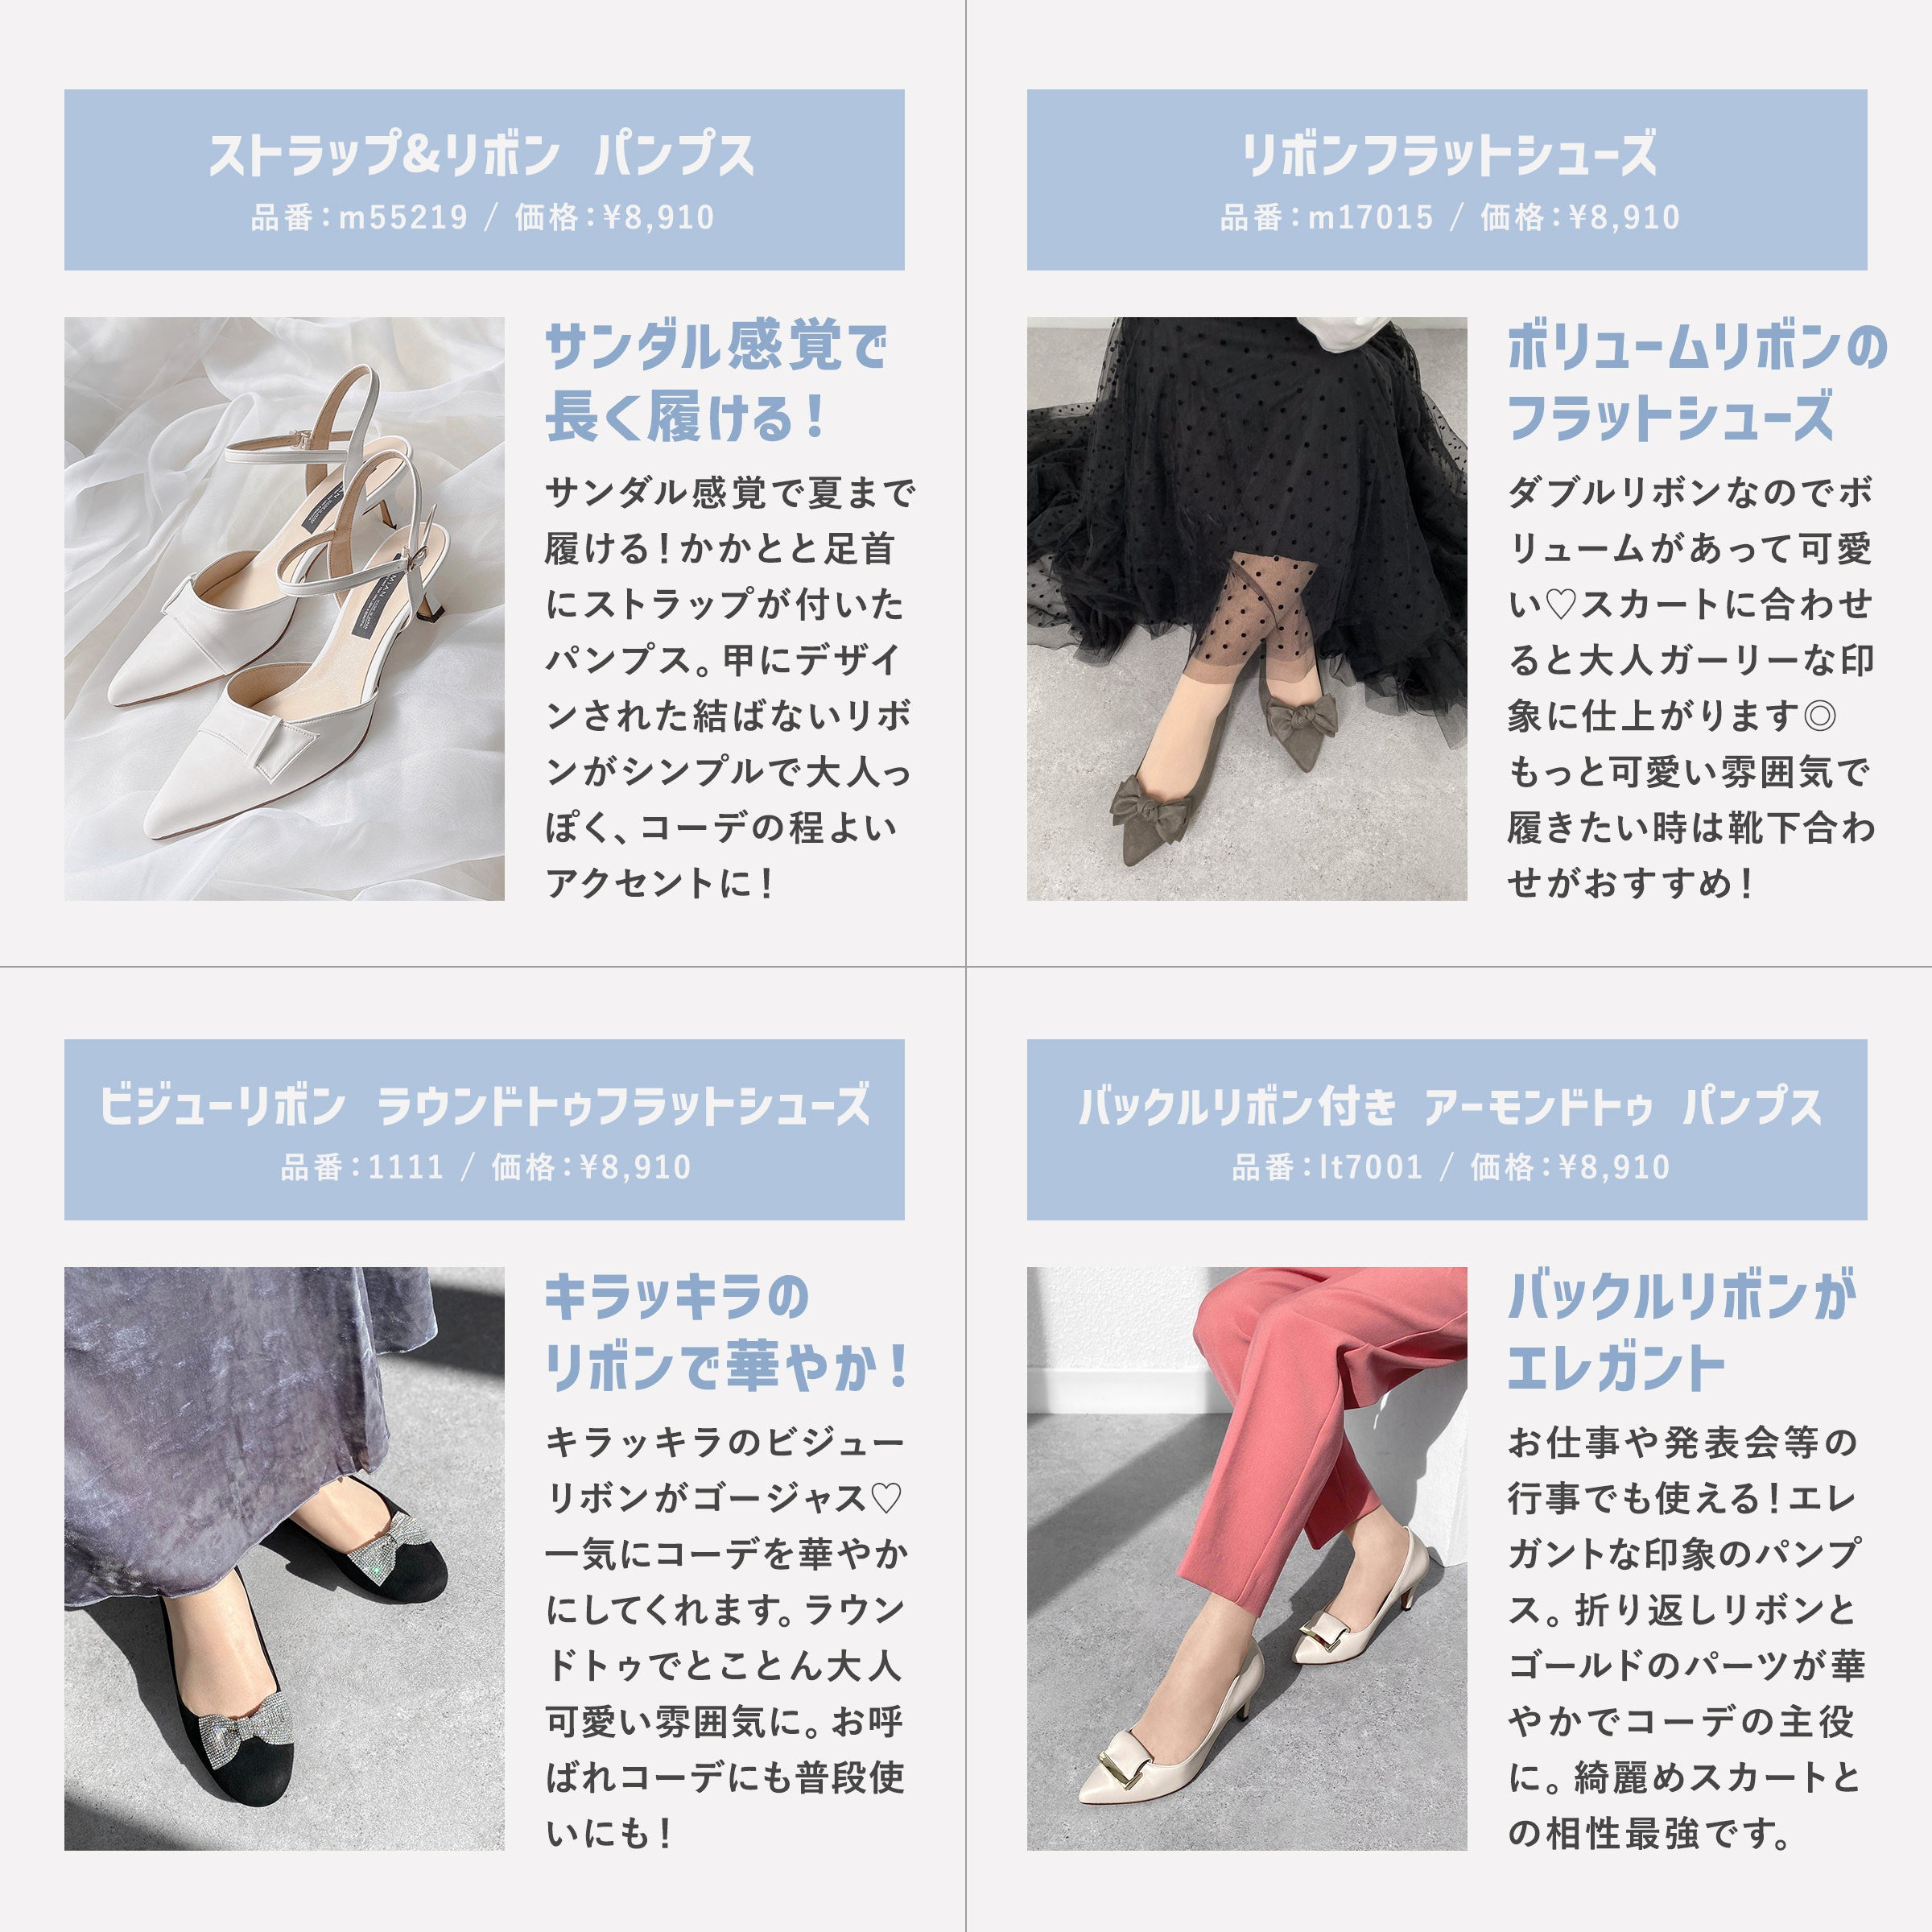 Special feature on shoes with cute ribbons for adults